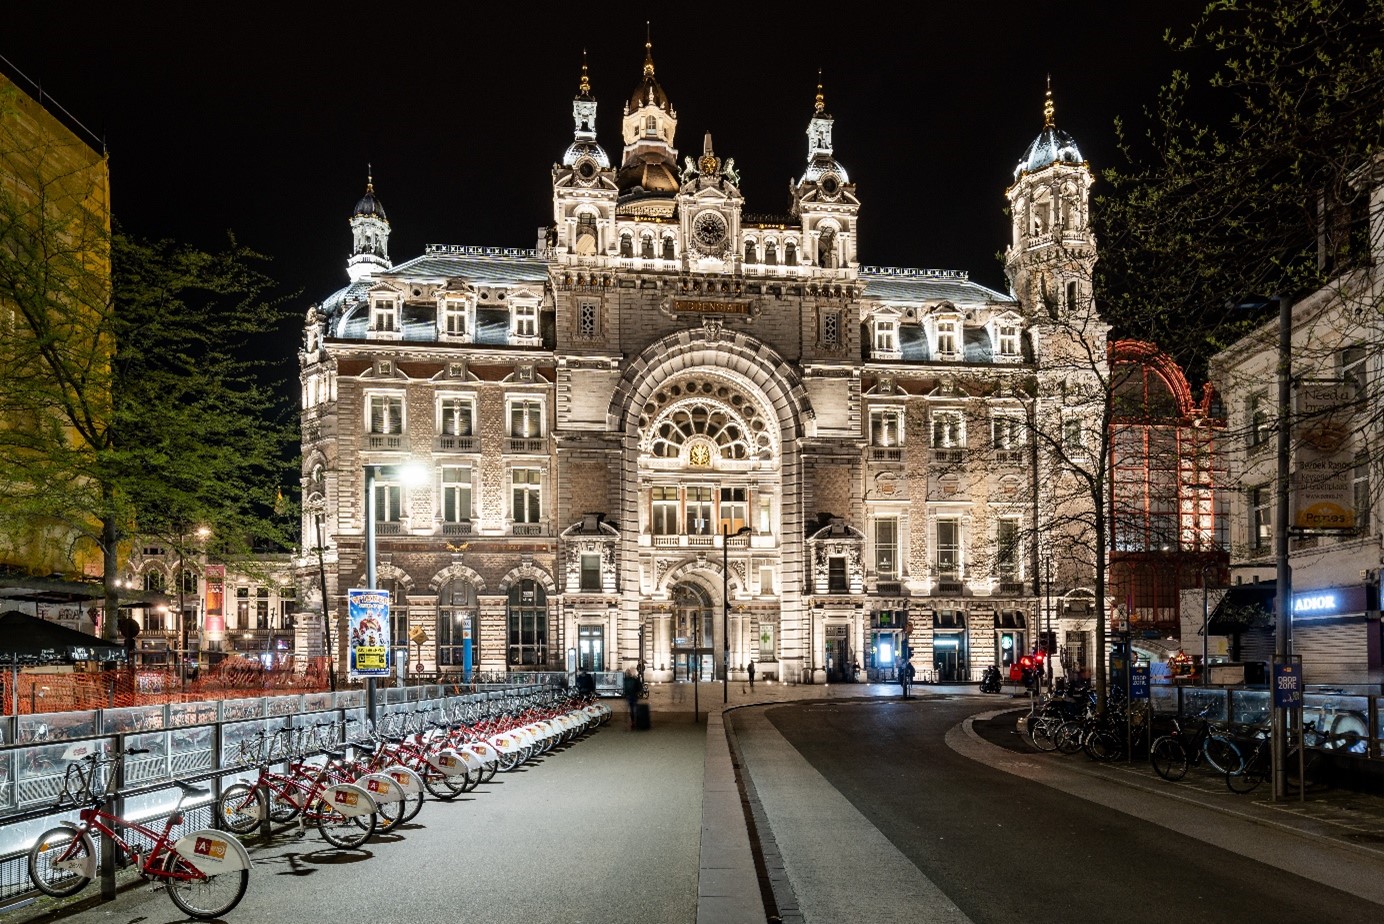 ©LUCID-Keyserlei-Night-image-of-the-Central-Station-City-of-Antwerp